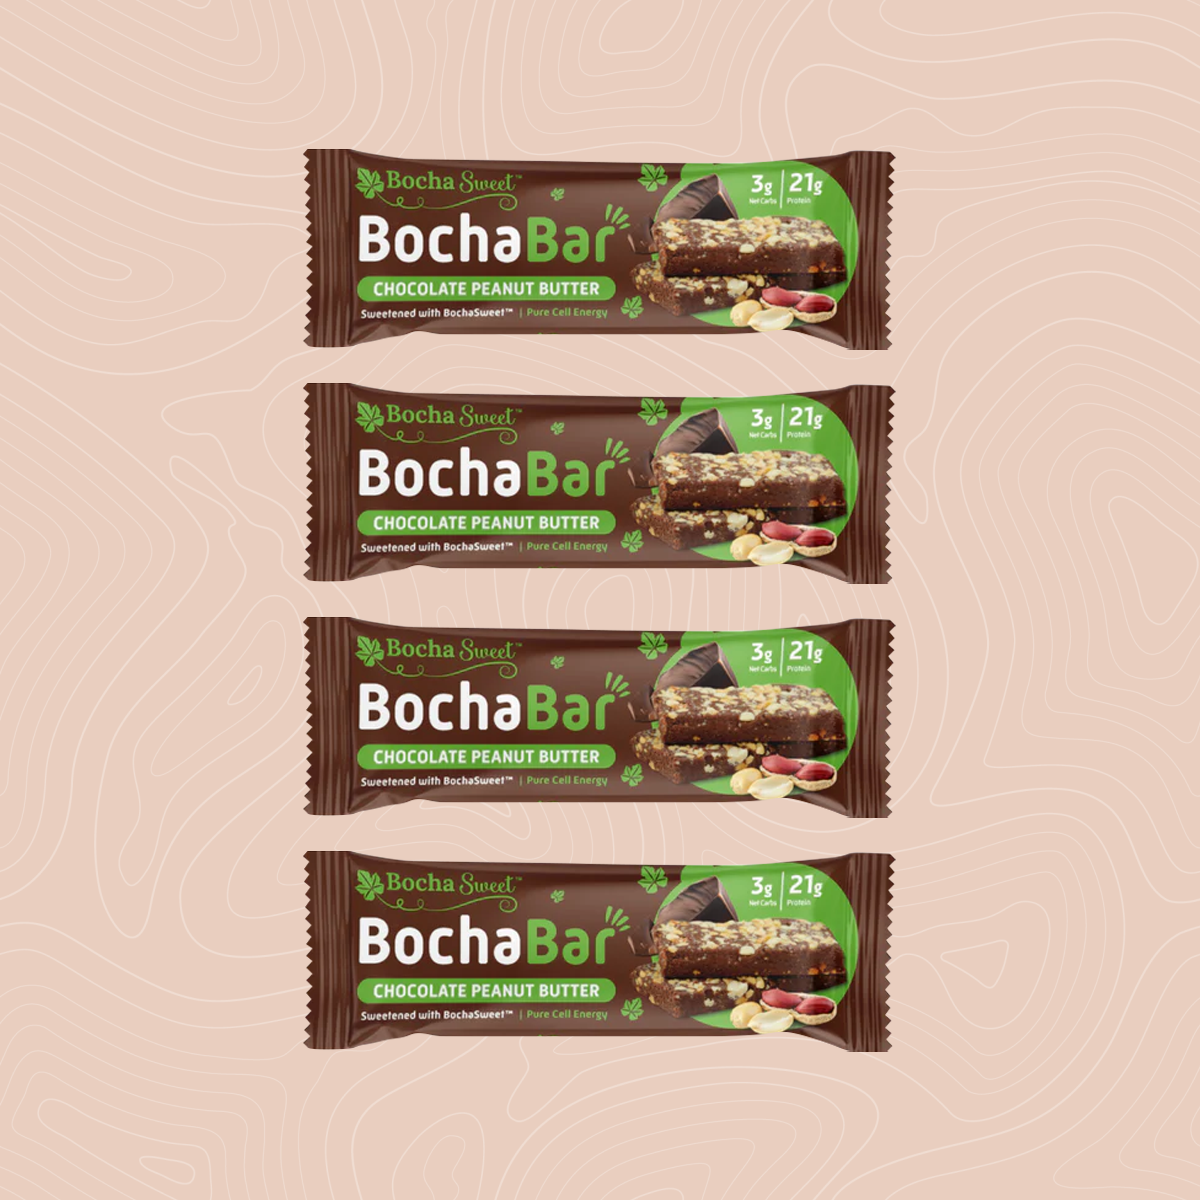 BOCHABAR TRIAL PACK - CHOCOLATE PEANUT BUTTER (BOX OF 4)